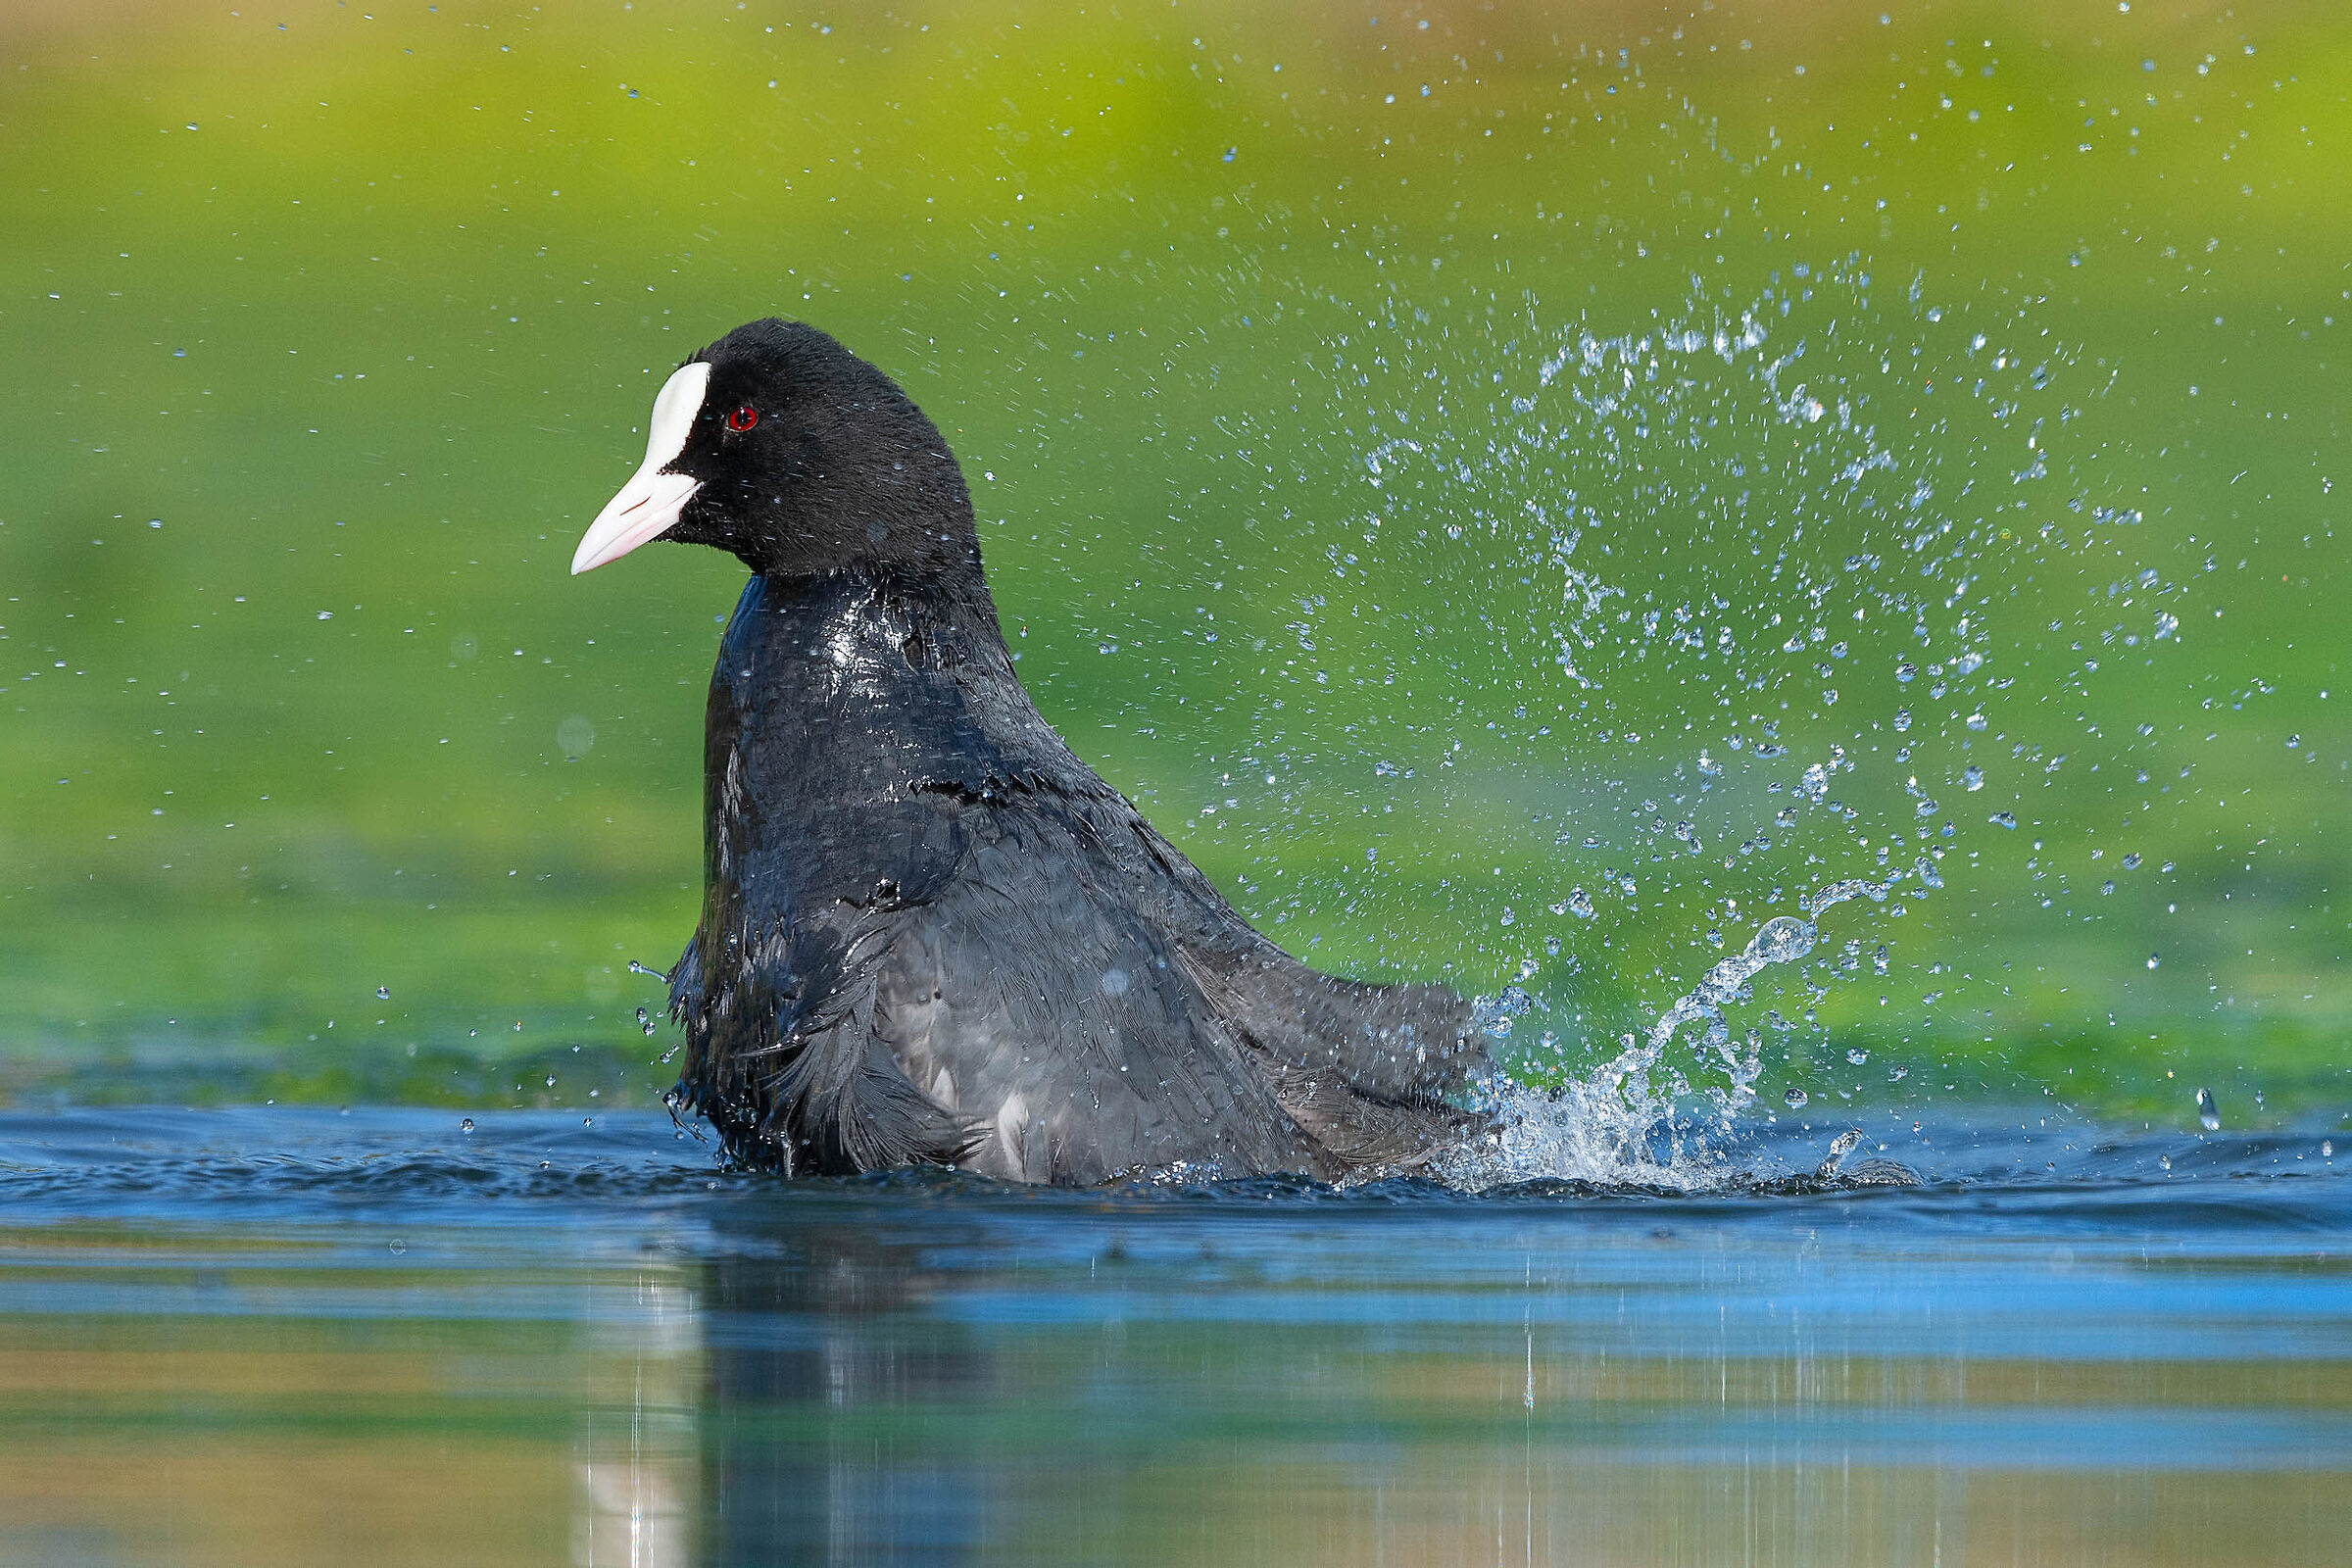 The coot's bath...